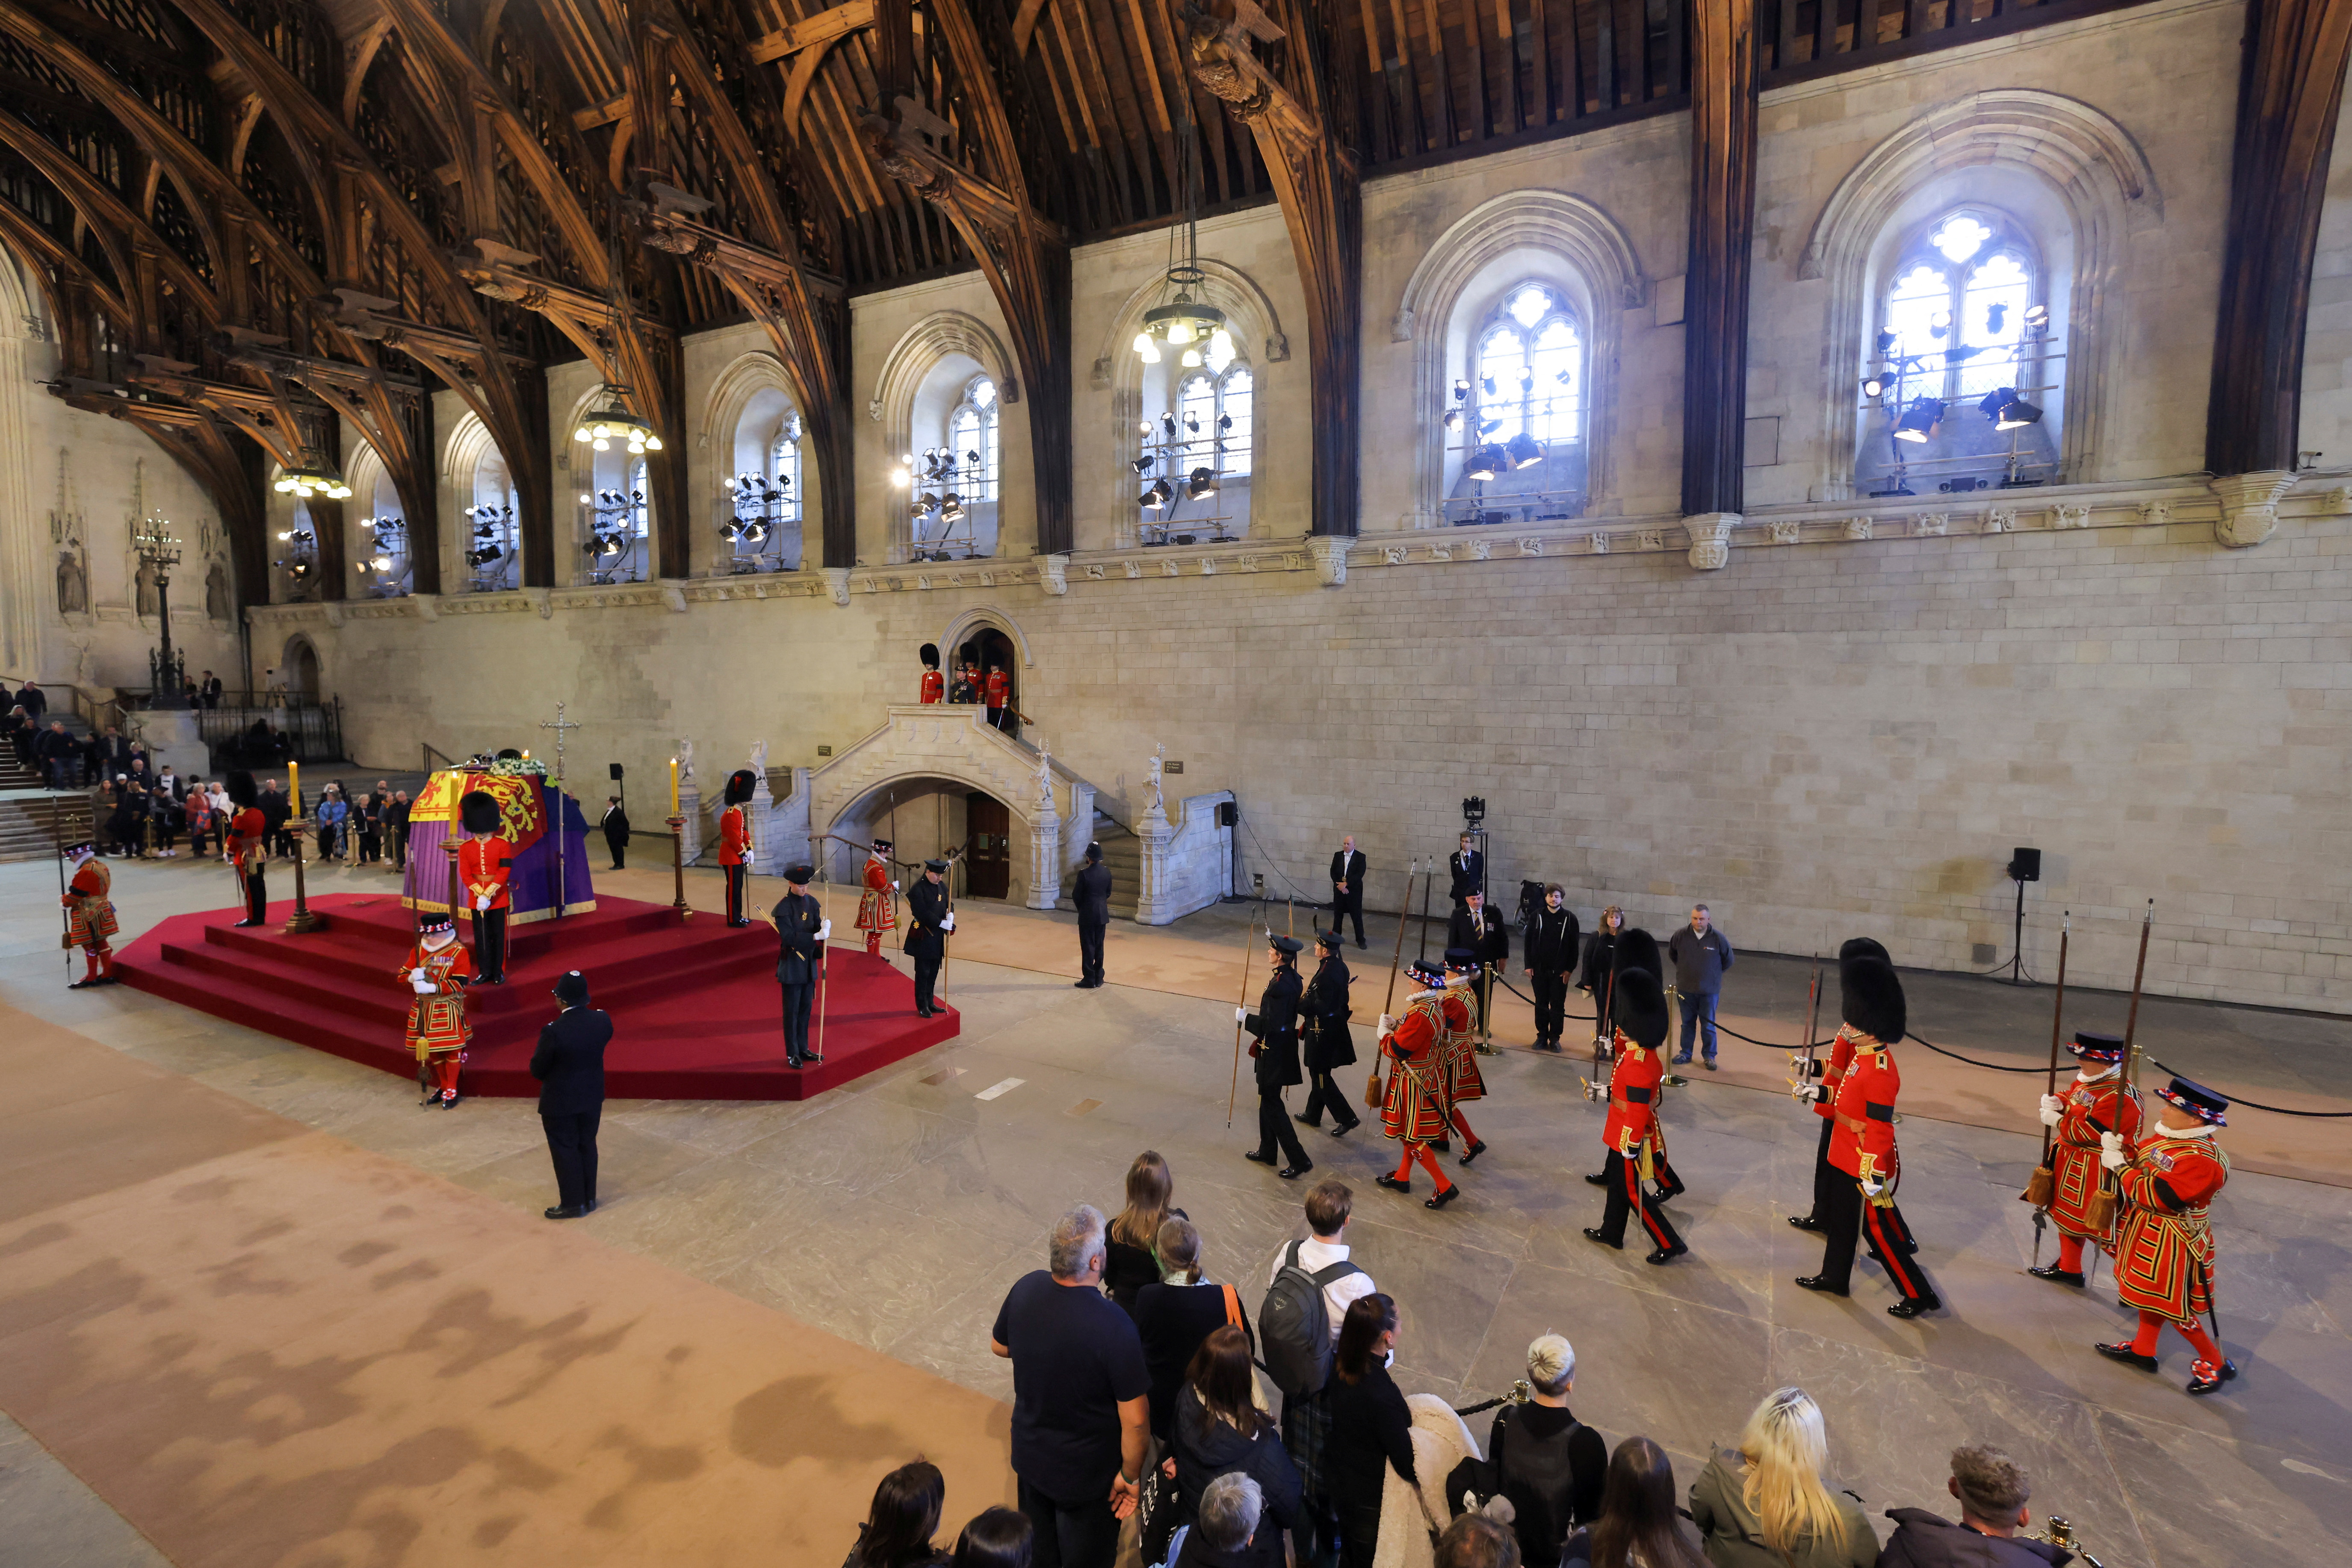 Royal guards march during a vigil as people pay their respects to the coffin of Britain's Queen Elizabeth inside Westminster Hall, following her death, in London, Britain, September 17, 2022. REUTERS/Marko Djurica/Pool